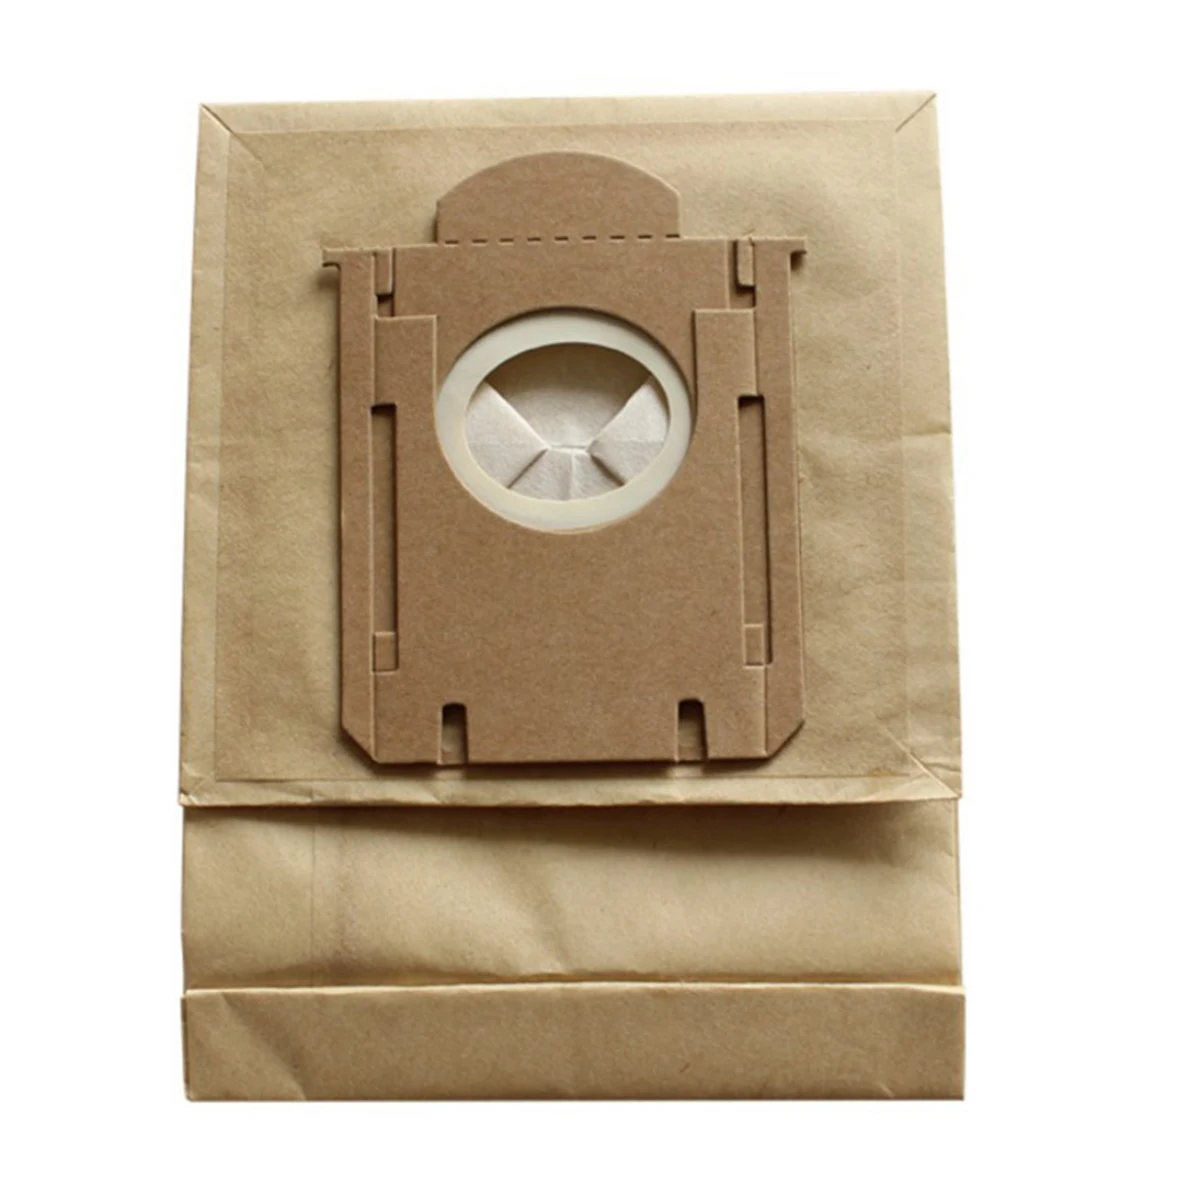 

10 Pcs Replacement Garbage Bag for Philips Vacuum Cleaner FC8202 FC8204 8206 8208 FC9083 Accessories Dust Bag Paper Bag